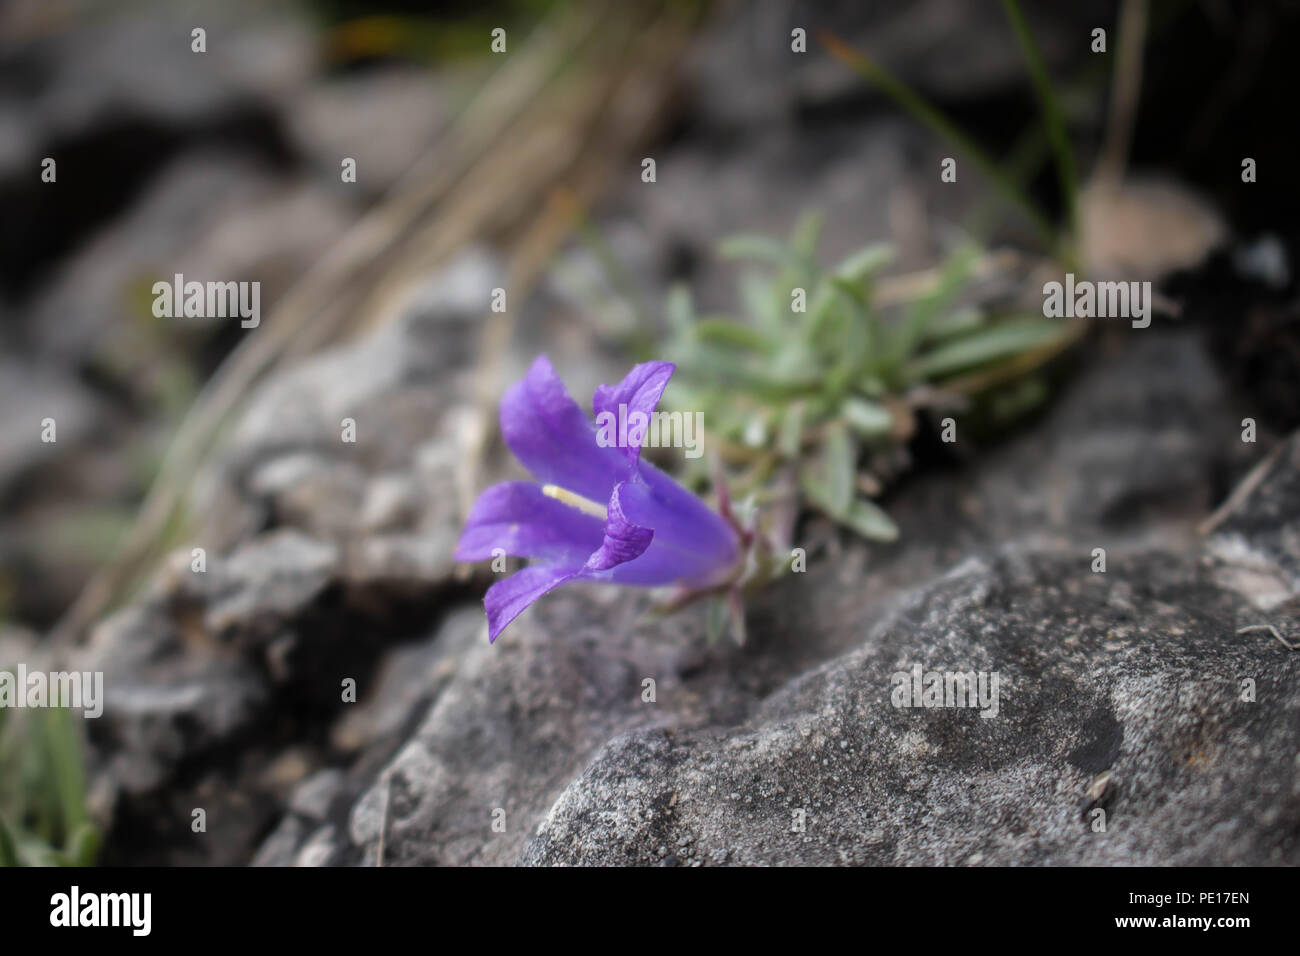 Violet flowers of Edraianthus on the rock at the Piribeg summit of Sharr mountains in Kosovo, Serbia Stock Photo